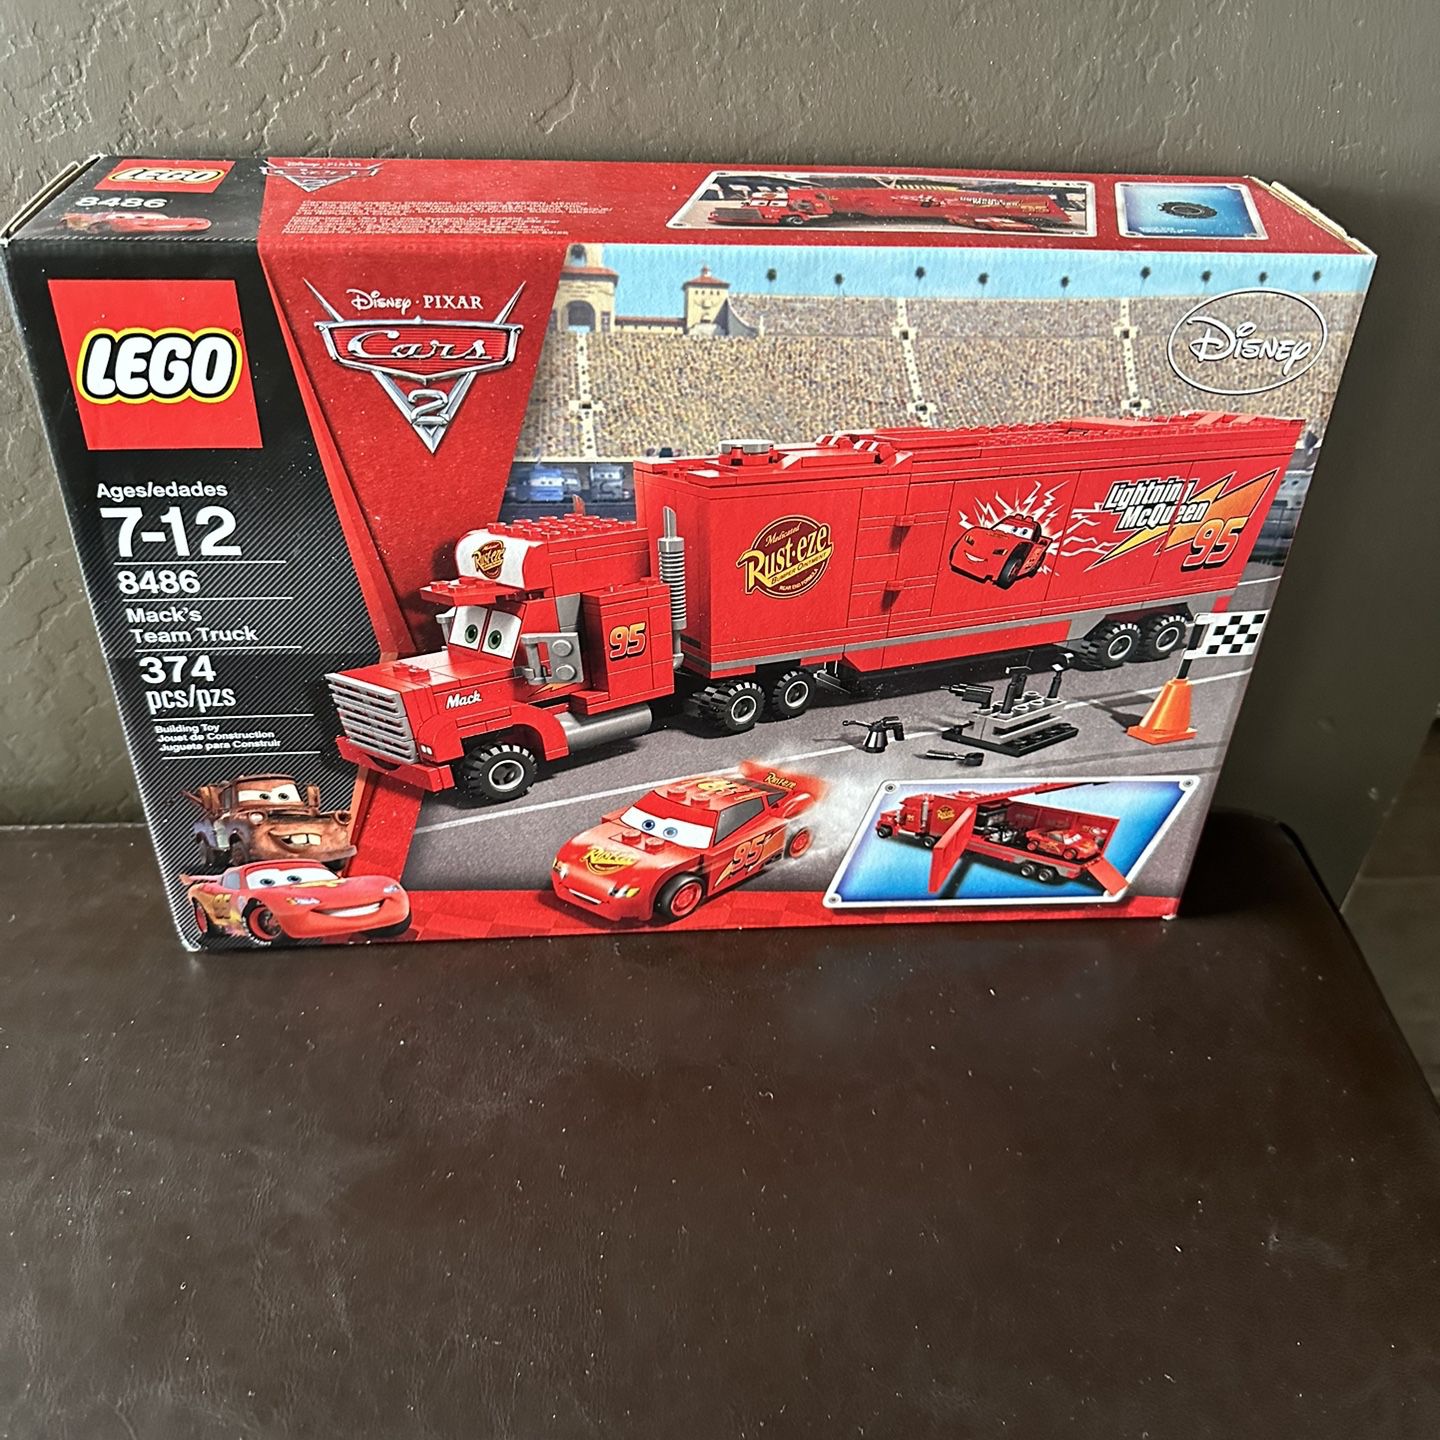 Lego Disney Cars Team Truck 8486 for Sale in CA - OfferUp